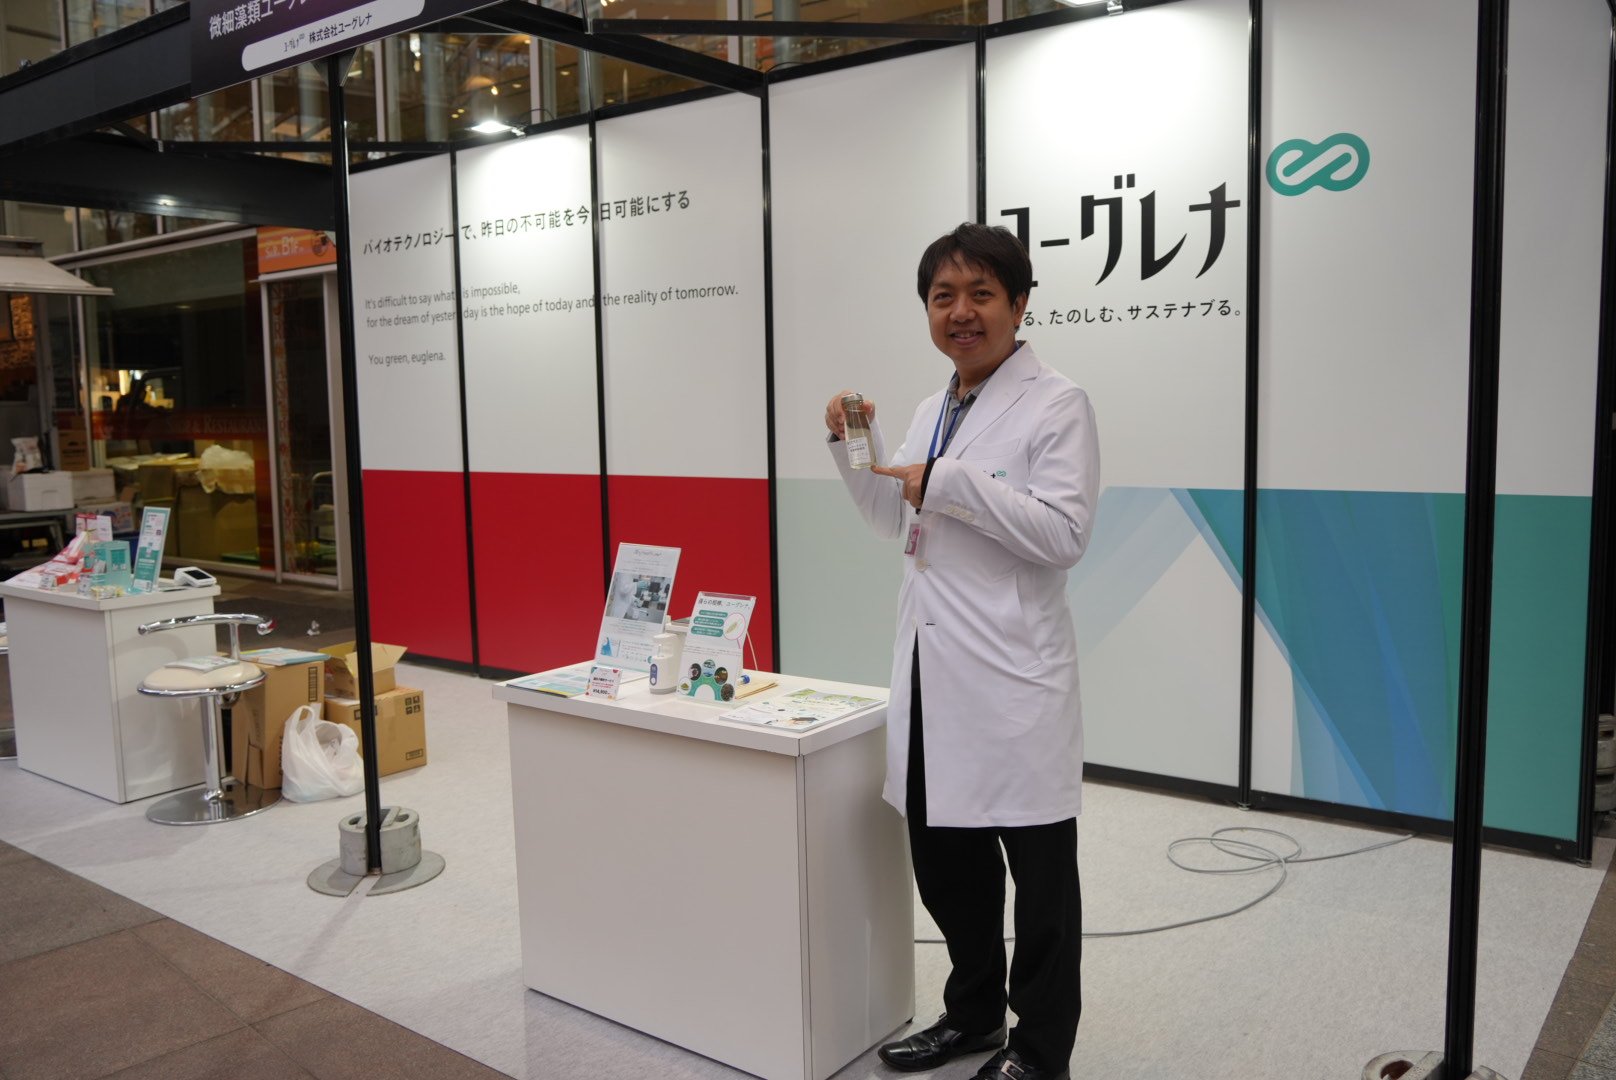 Euglena Co., Ltd. exhibited a booth at “SHINAGAWA TECH SHOWCASE 2024” and introduced new products.